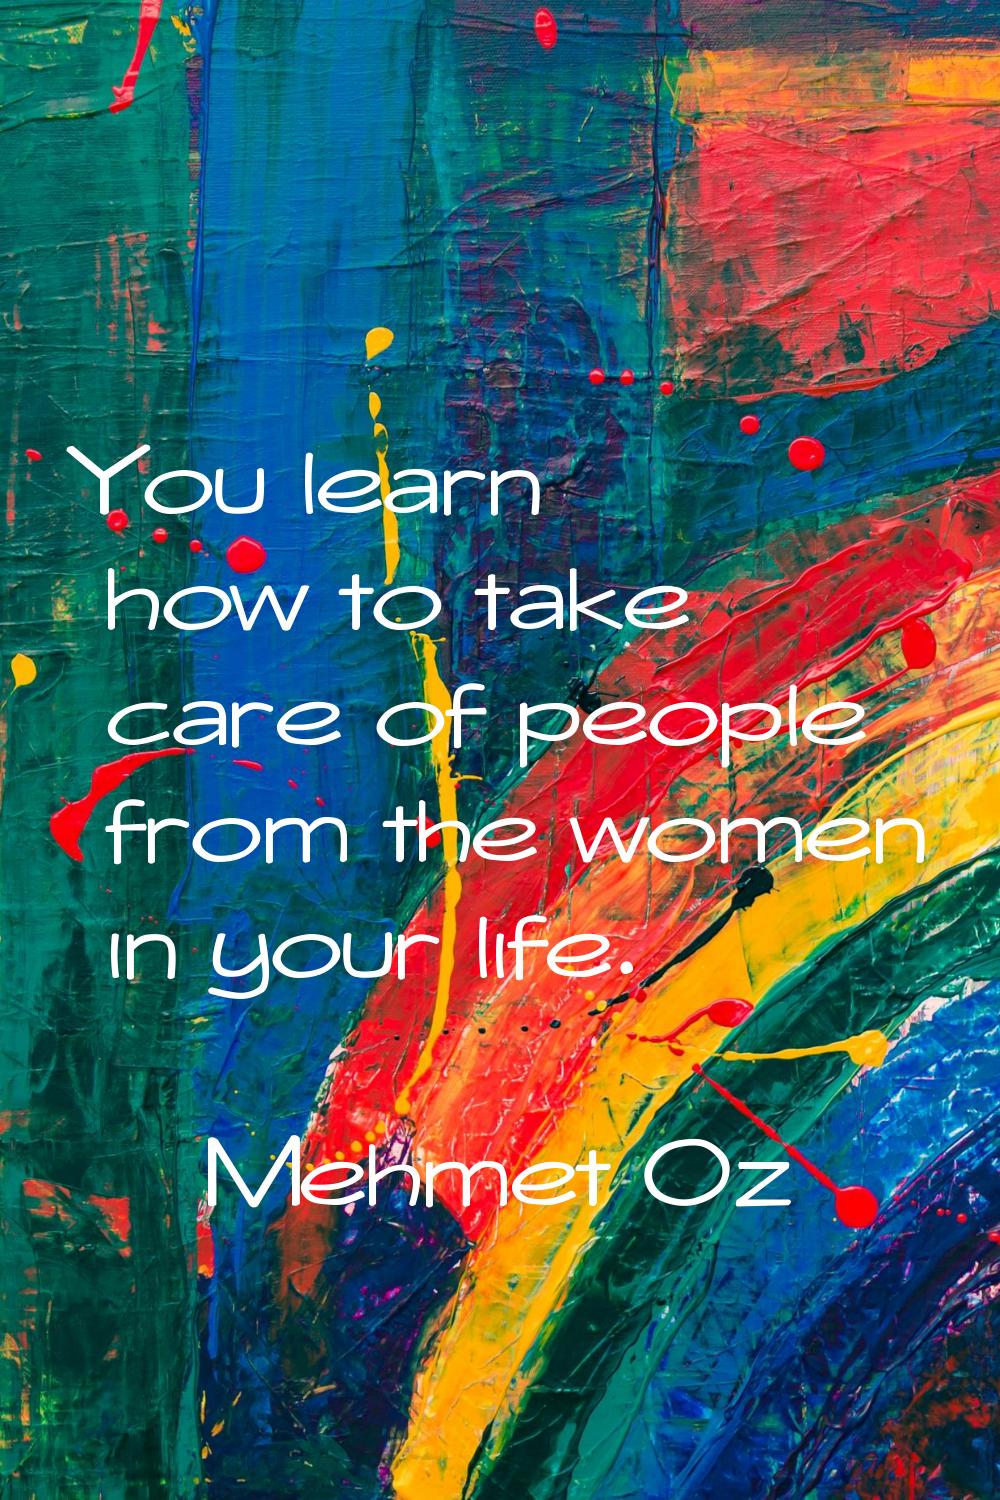 You learn how to take care of people from the women in your life.